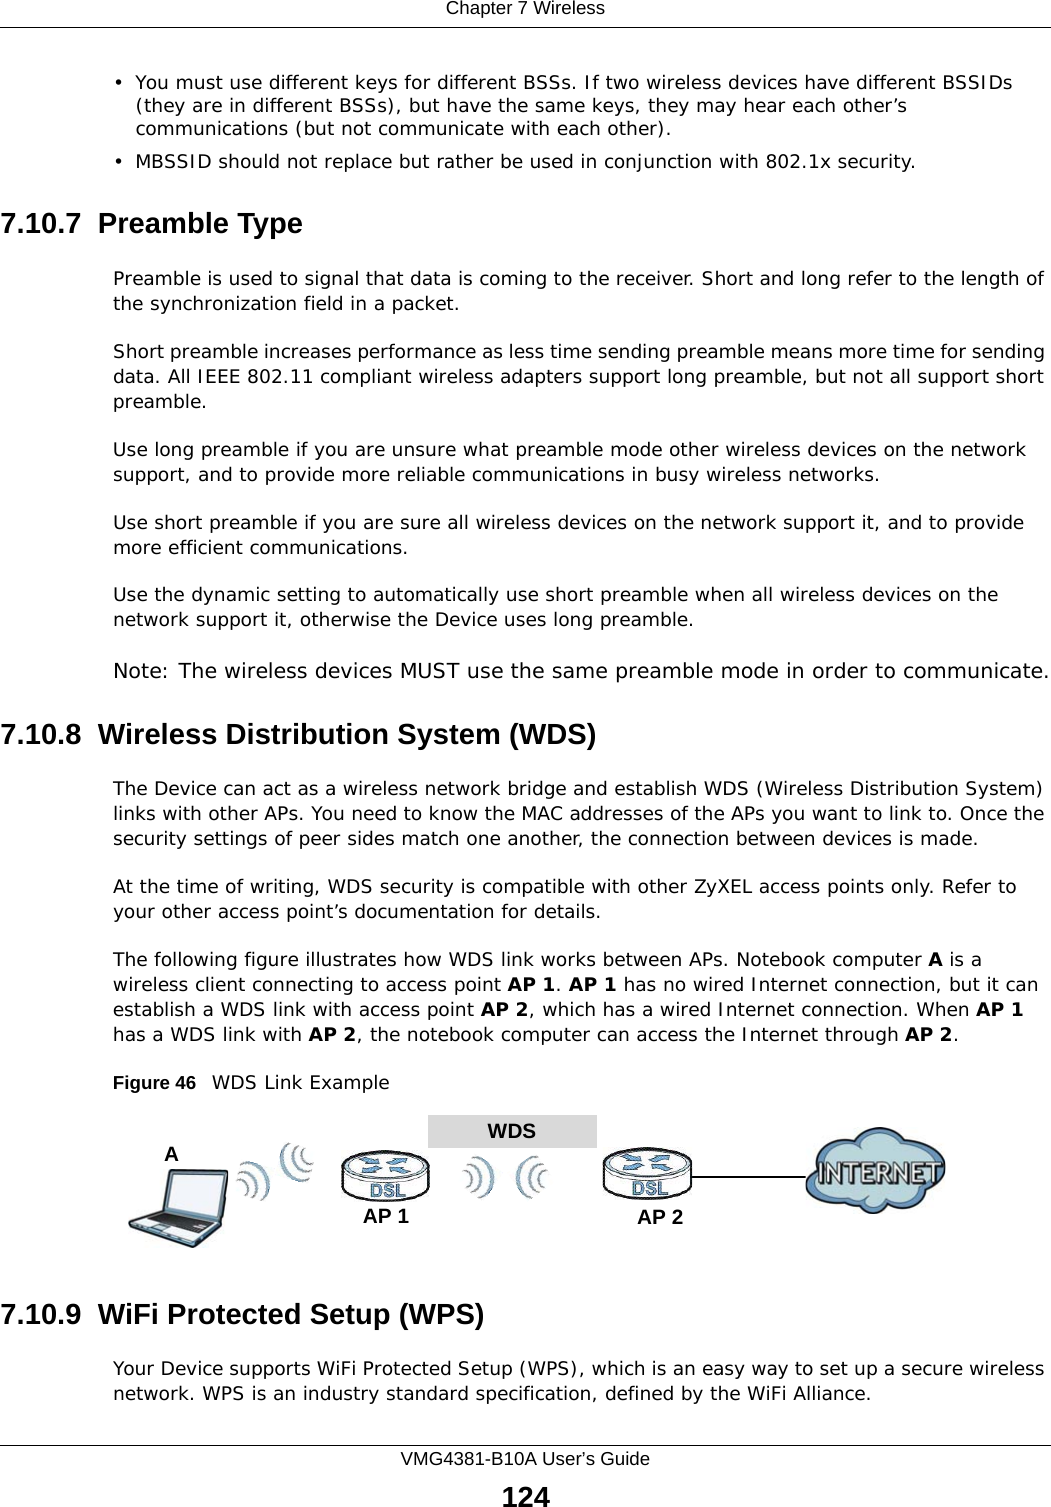 Chapter 7 WirelessVMG4381-B10A User’s Guide124• You must use different keys for different BSSs. If two wireless devices have different BSSIDs (they are in different BSSs), but have the same keys, they may hear each other’s communications (but not communicate with each other).• MBSSID should not replace but rather be used in conjunction with 802.1x security.7.10.7  Preamble TypePreamble is used to signal that data is coming to the receiver. Short and long refer to the length of the synchronization field in a packet.Short preamble increases performance as less time sending preamble means more time for sending data. All IEEE 802.11 compliant wireless adapters support long preamble, but not all support short preamble. Use long preamble if you are unsure what preamble mode other wireless devices on the network support, and to provide more reliable communications in busy wireless networks. Use short preamble if you are sure all wireless devices on the network support it, and to provide more efficient communications.Use the dynamic setting to automatically use short preamble when all wireless devices on the network support it, otherwise the Device uses long preamble.Note: The wireless devices MUST use the same preamble mode in order to communicate.7.10.8  Wireless Distribution System (WDS)The Device can act as a wireless network bridge and establish WDS (Wireless Distribution System) links with other APs. You need to know the MAC addresses of the APs you want to link to. Once the security settings of peer sides match one another, the connection between devices is made.At the time of writing, WDS security is compatible with other ZyXEL access points only. Refer to your other access point’s documentation for details.The following figure illustrates how WDS link works between APs. Notebook computer A is a wireless client connecting to access point AP 1. AP 1 has no wired Internet connection, but it can establish a WDS link with access point AP 2, which has a wired Internet connection. When AP 1 has a WDS link with AP 2, the notebook computer can access the Internet through AP 2.Figure 46   WDS Link Example7.10.9  WiFi Protected Setup (WPS)Your Device supports WiFi Protected Setup (WPS), which is an easy way to set up a secure wireless network. WPS is an industry standard specification, defined by the WiFi Alliance.WDSAP 2AP 1A